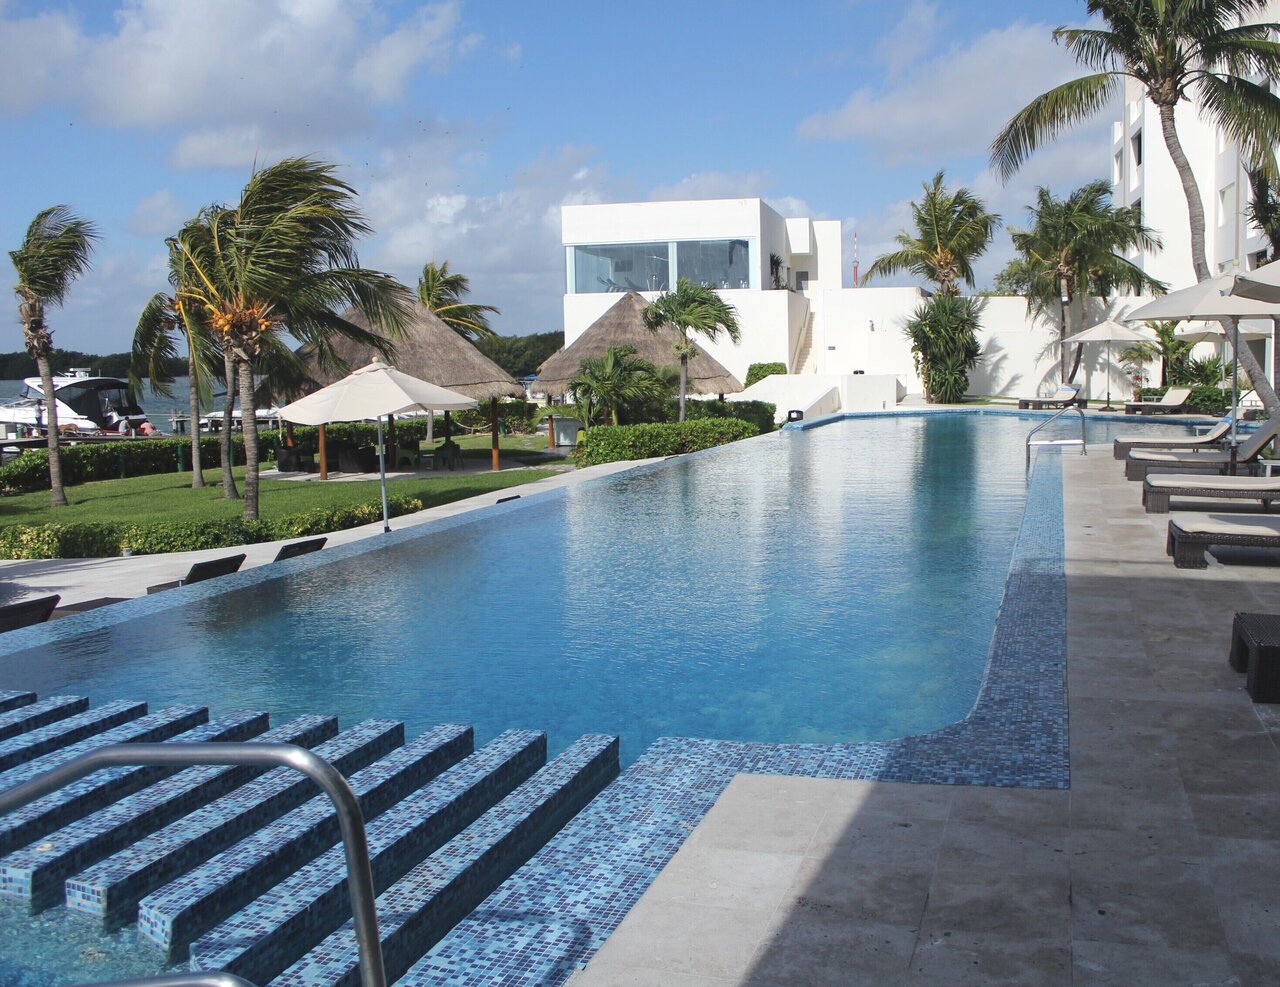 Real Inn Cancun By Camino Real